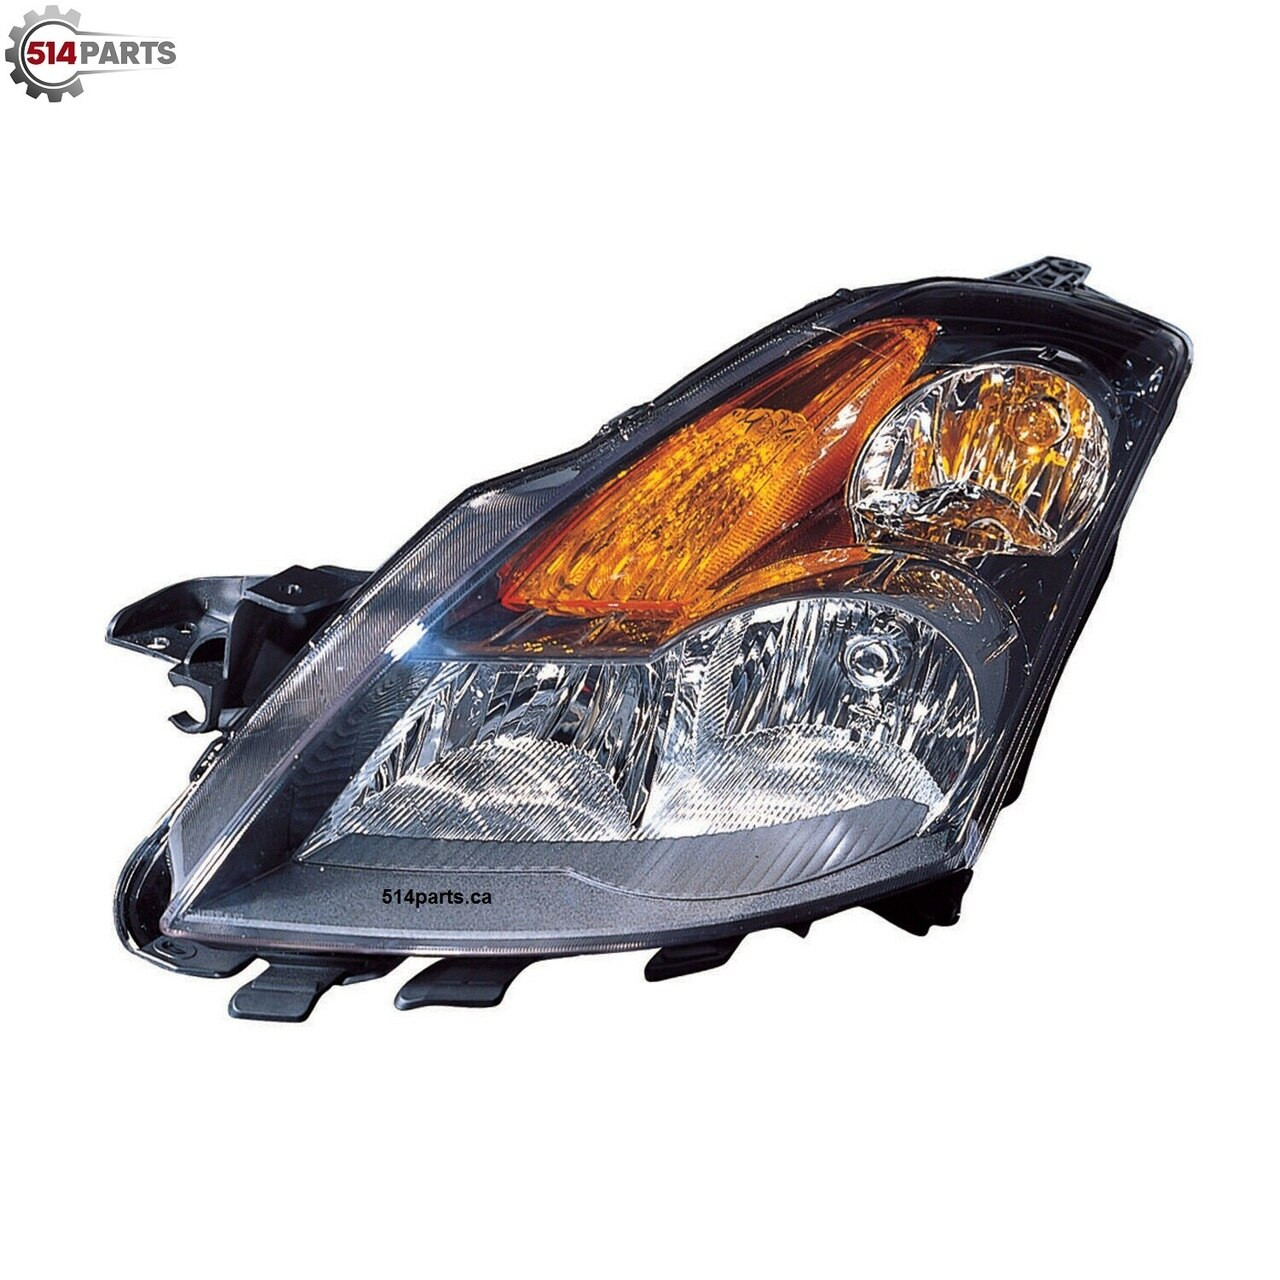 2007 - 2009 NISSAN ALTIMA and ALTIMA HYBRID HEADLIGHTS with GRAY BEZEL - PHARES AVANT AVEC LUNETTE GRISE